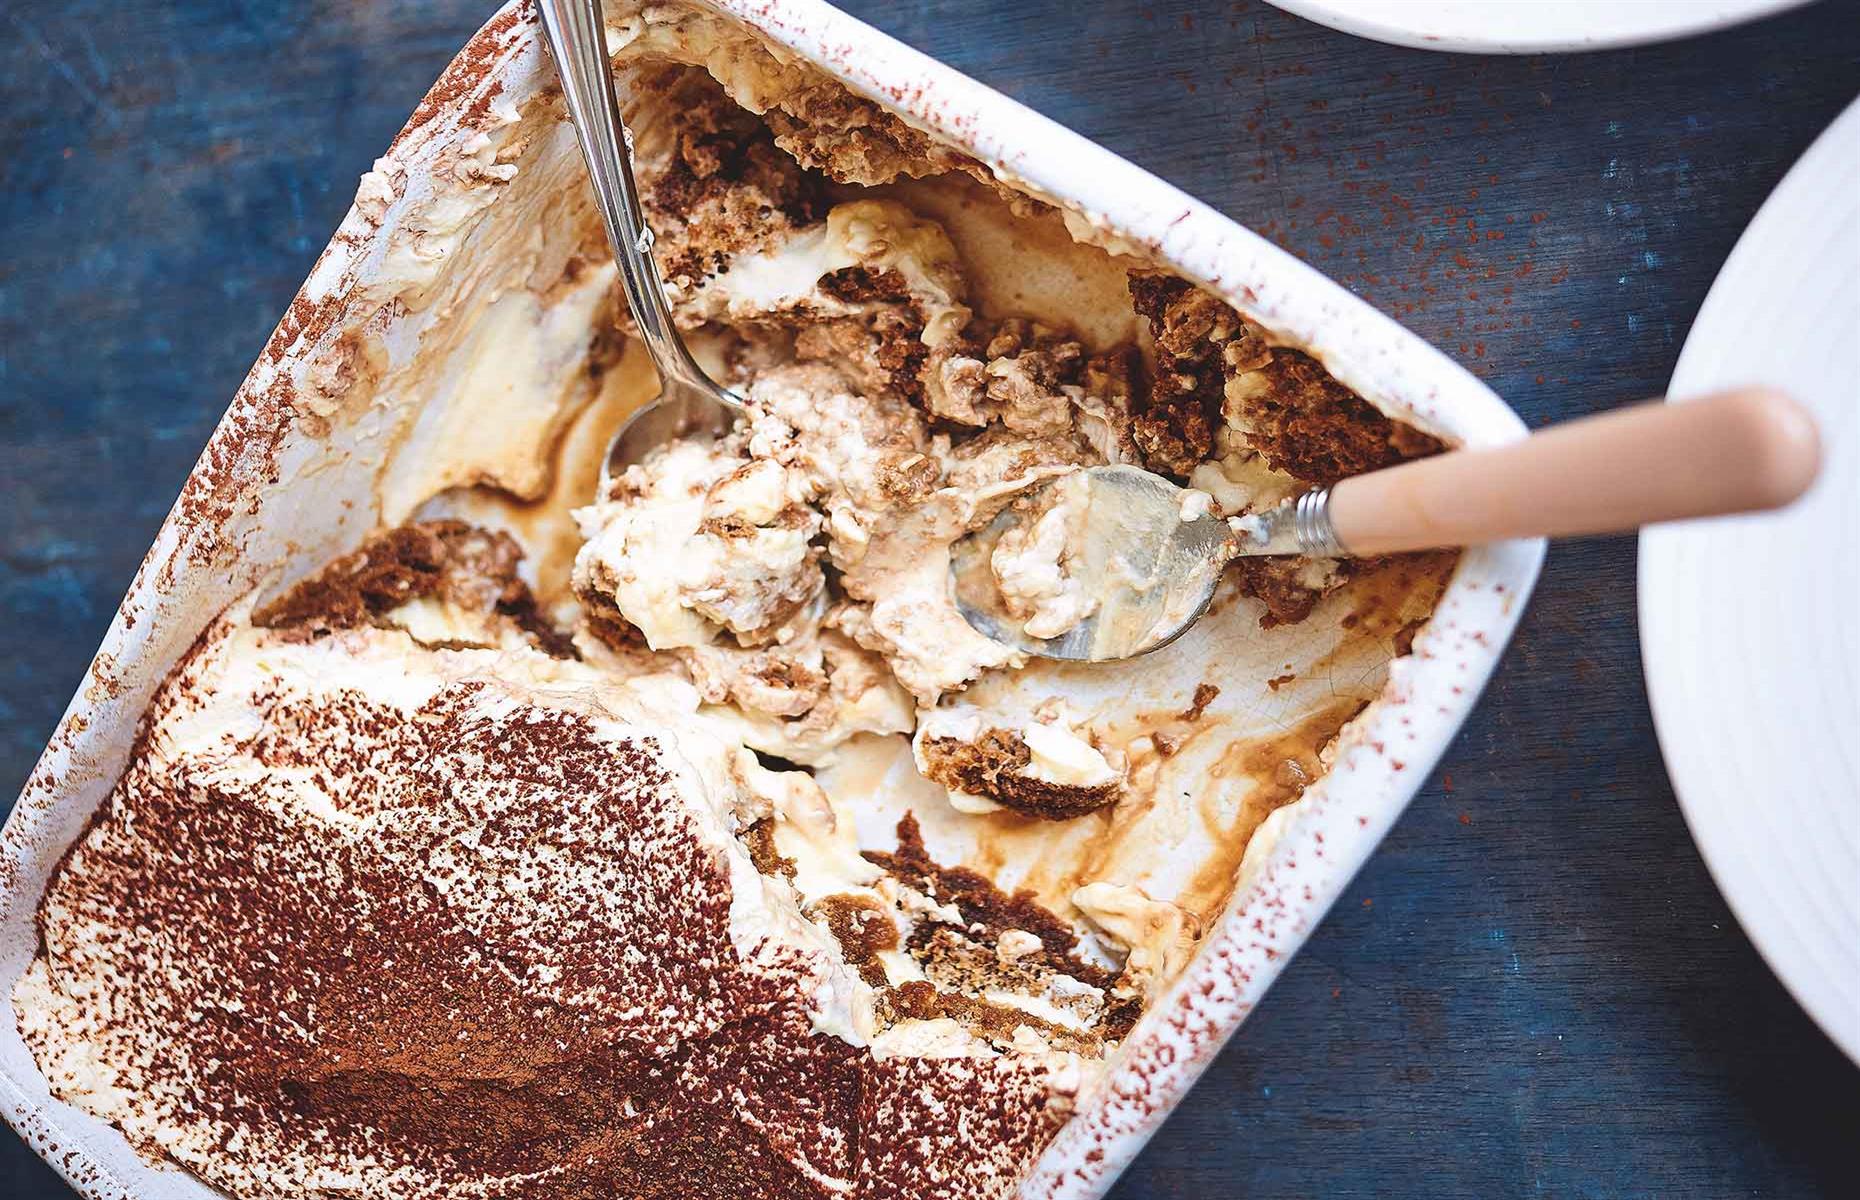 <p>Classic tiramisù, made with eggs and mascarpone, usually needs a long time sitting in the refrigerator to set. But this quick version uses instant coffee granules, pillowy whipped cream and store-bought sponge fingers to save time.</p>  <p><strong><a href="https://www.lovefood.com/recipes/100298/mob-kitchen-easy-tiramisu-recipe">Get the recipe for 12-minute tiramisù here</a></strong></p>